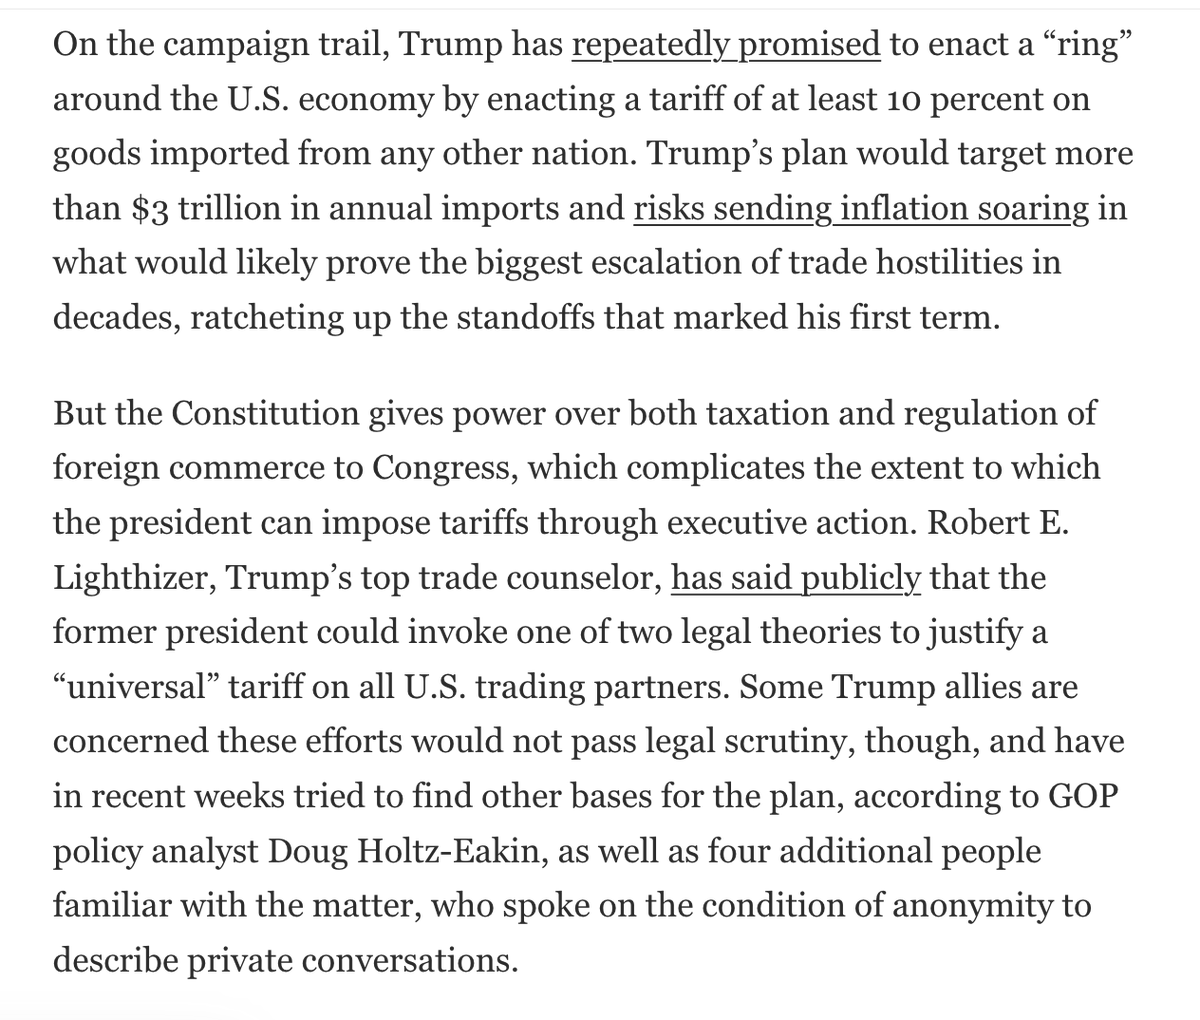 Trump is very serious about wanting to put a 10% tariff on ALL imports. He calls it a 'ring around the country.' Can a president do that? Congress is supposed to have the power of the purse. Still, Trump advisers are trying to figure out a way @JStein_WaPo reports.